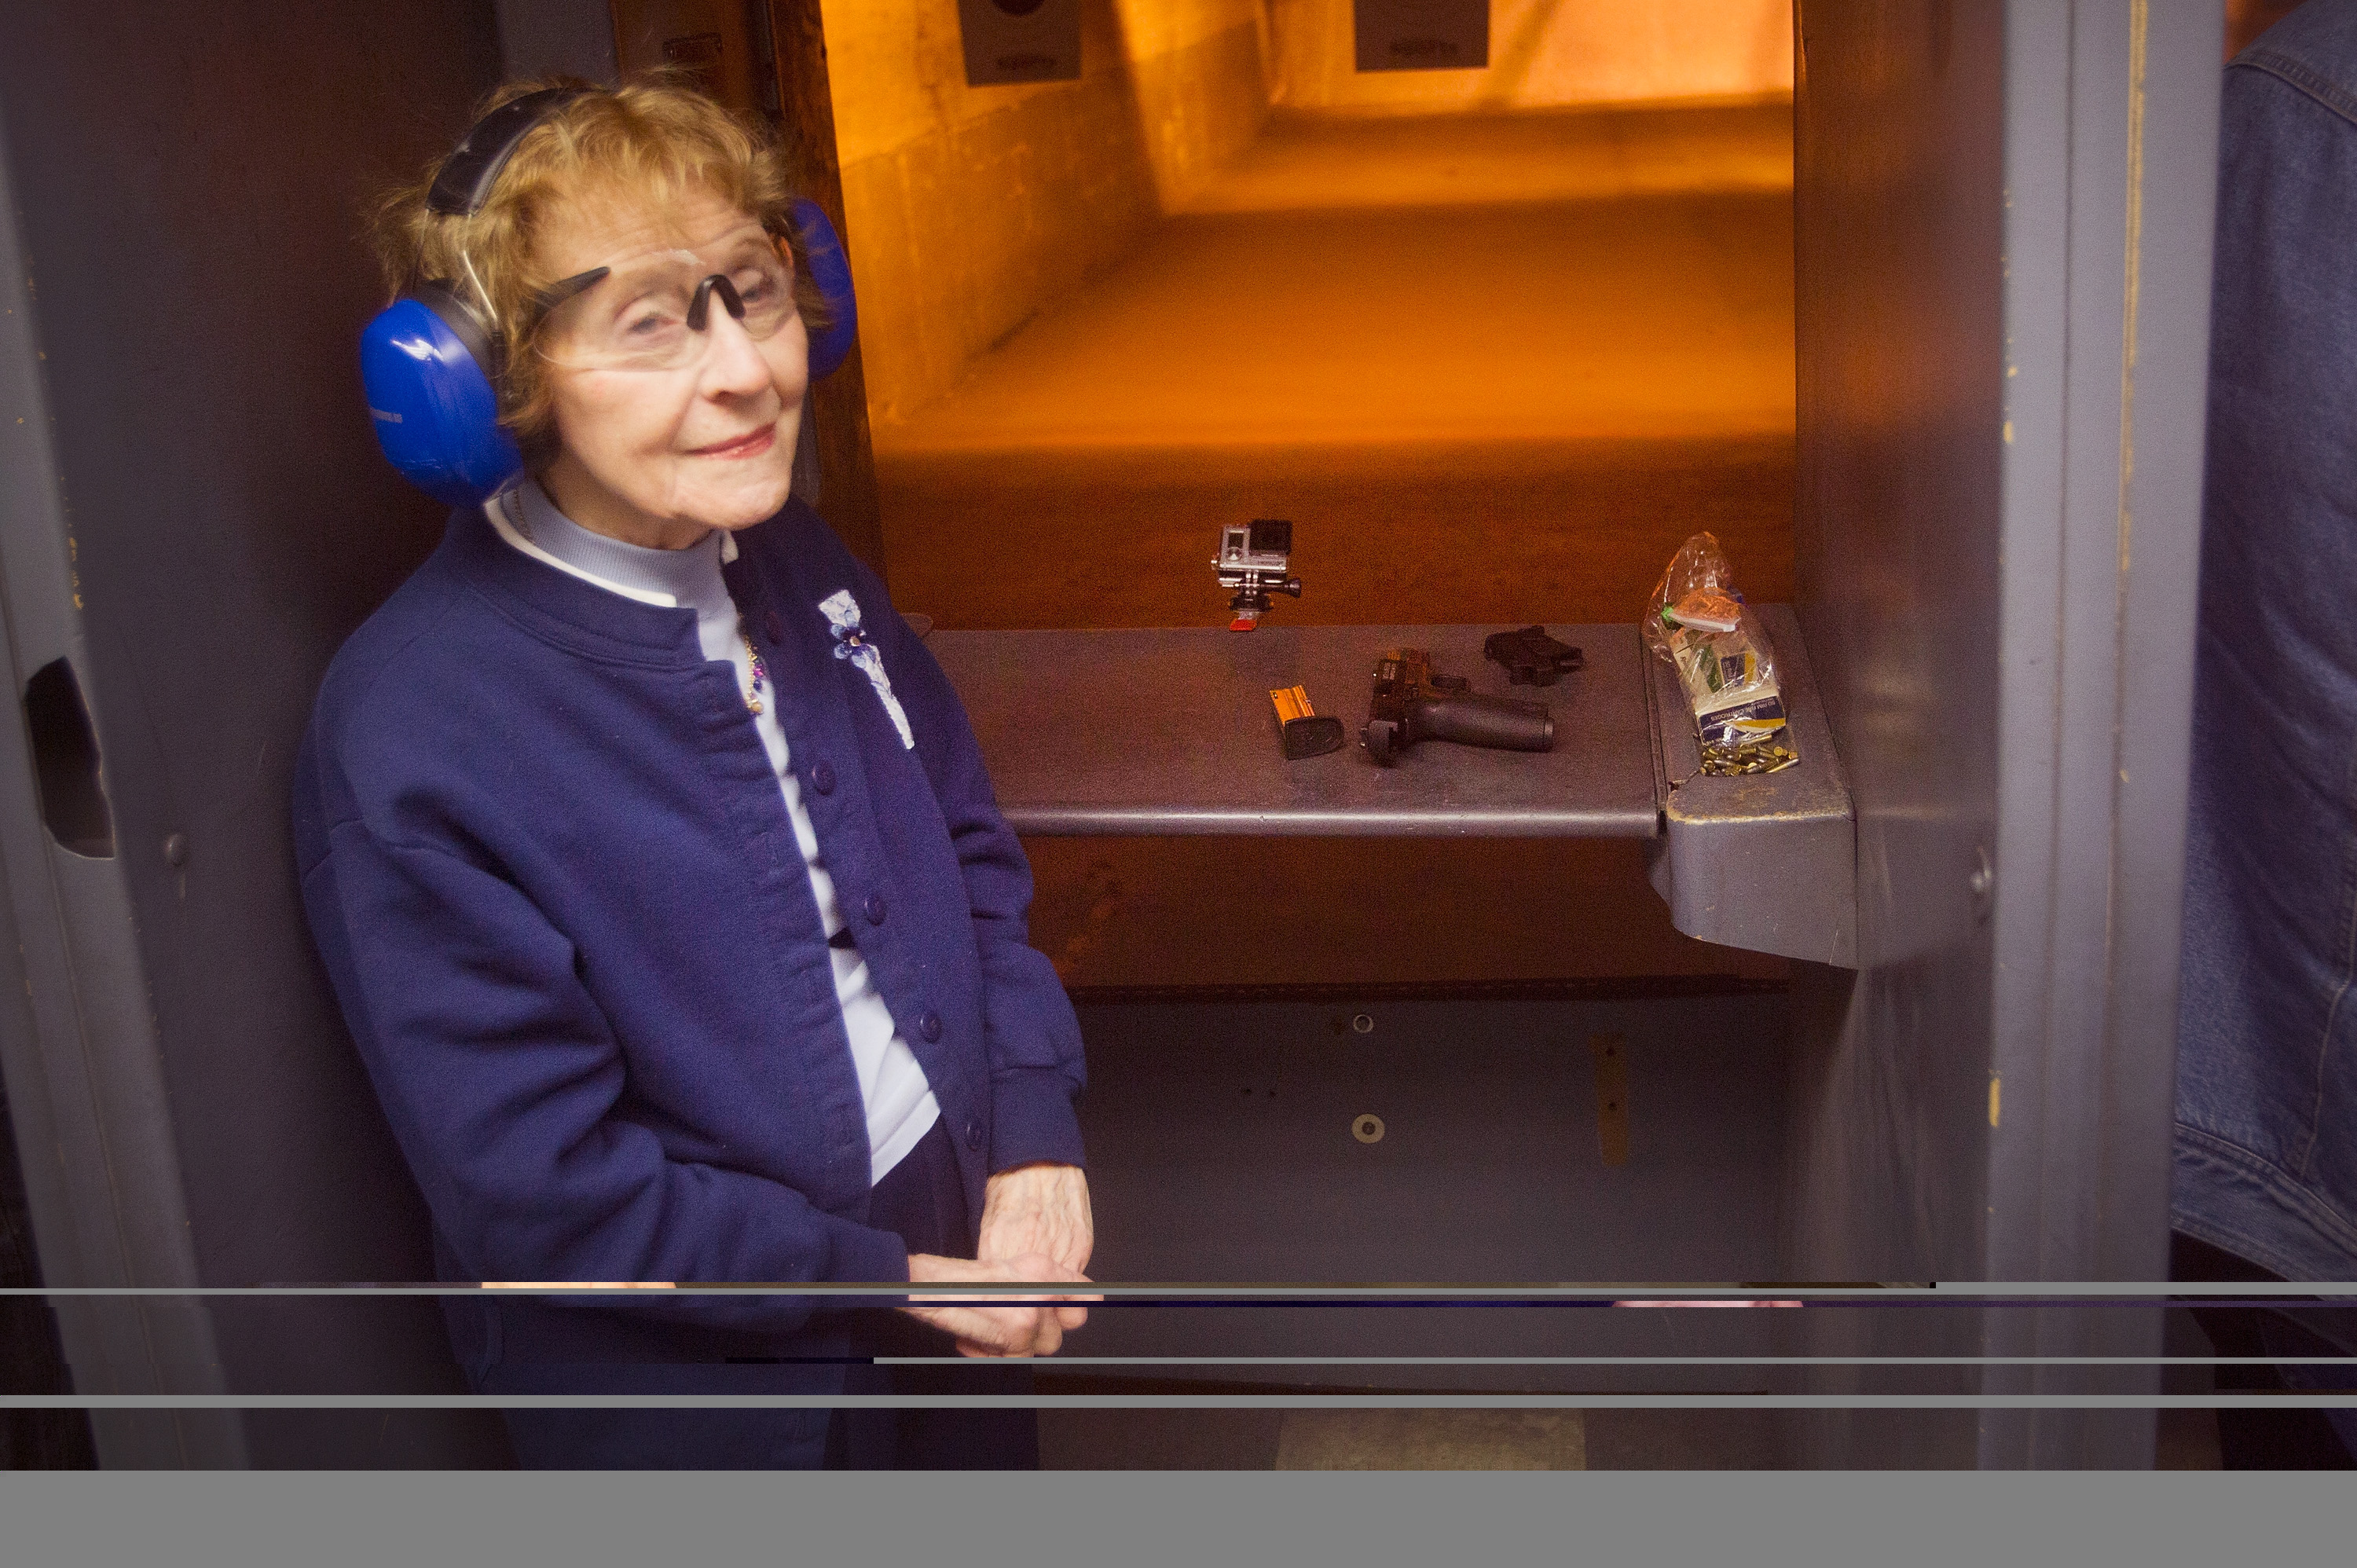 Eighty-three-year-old Evelyn Donohue listens to instructions at a shooting range before firing her pistol to qualify for an Illinois concealed carry permit on February 14, 2014 in Posen, Illinois. Illinois recently became the final state to allow residents to carry a concealed weapon after they complete a 16-hour course. (Photo by Scott Olson/Getty Images)